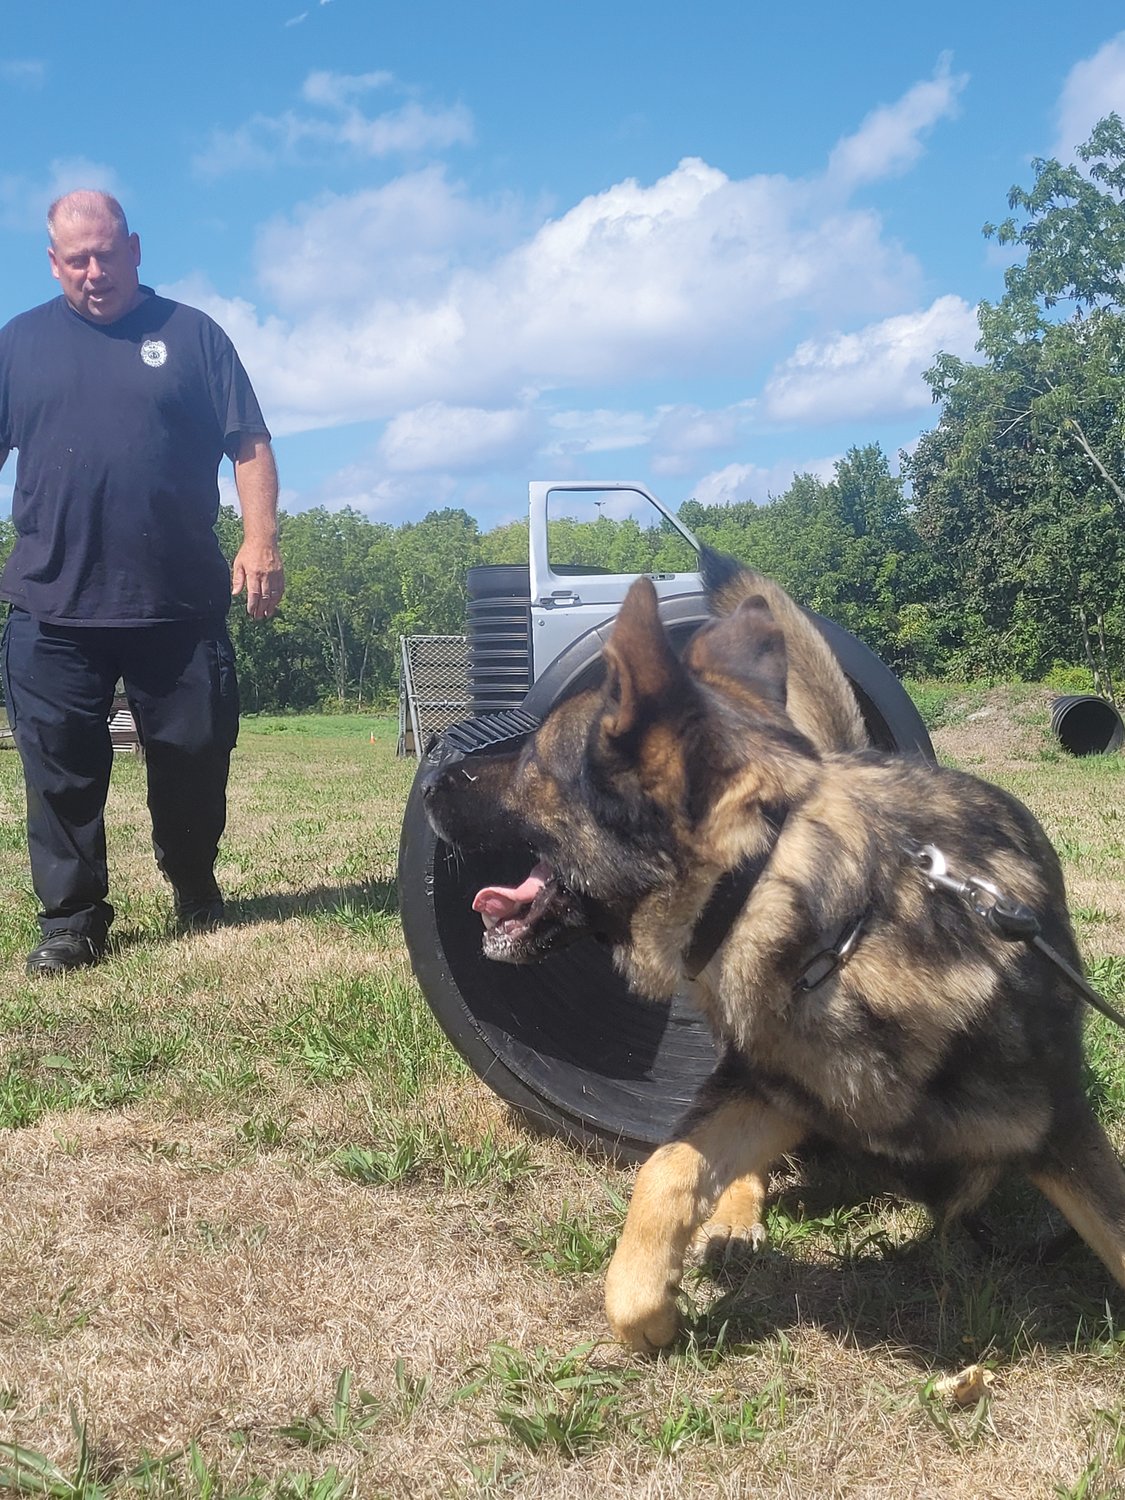 TRAINING FOR DUTY: K-9 Taz and his handler, URI PD Patrolman Paul Wells, work the obstacle course outside the ACI in Cranston. Wells recently lost his K-9 partner, but has been working with Taz for years. A successful police dog undergoes constant training to keep its skills sharp.